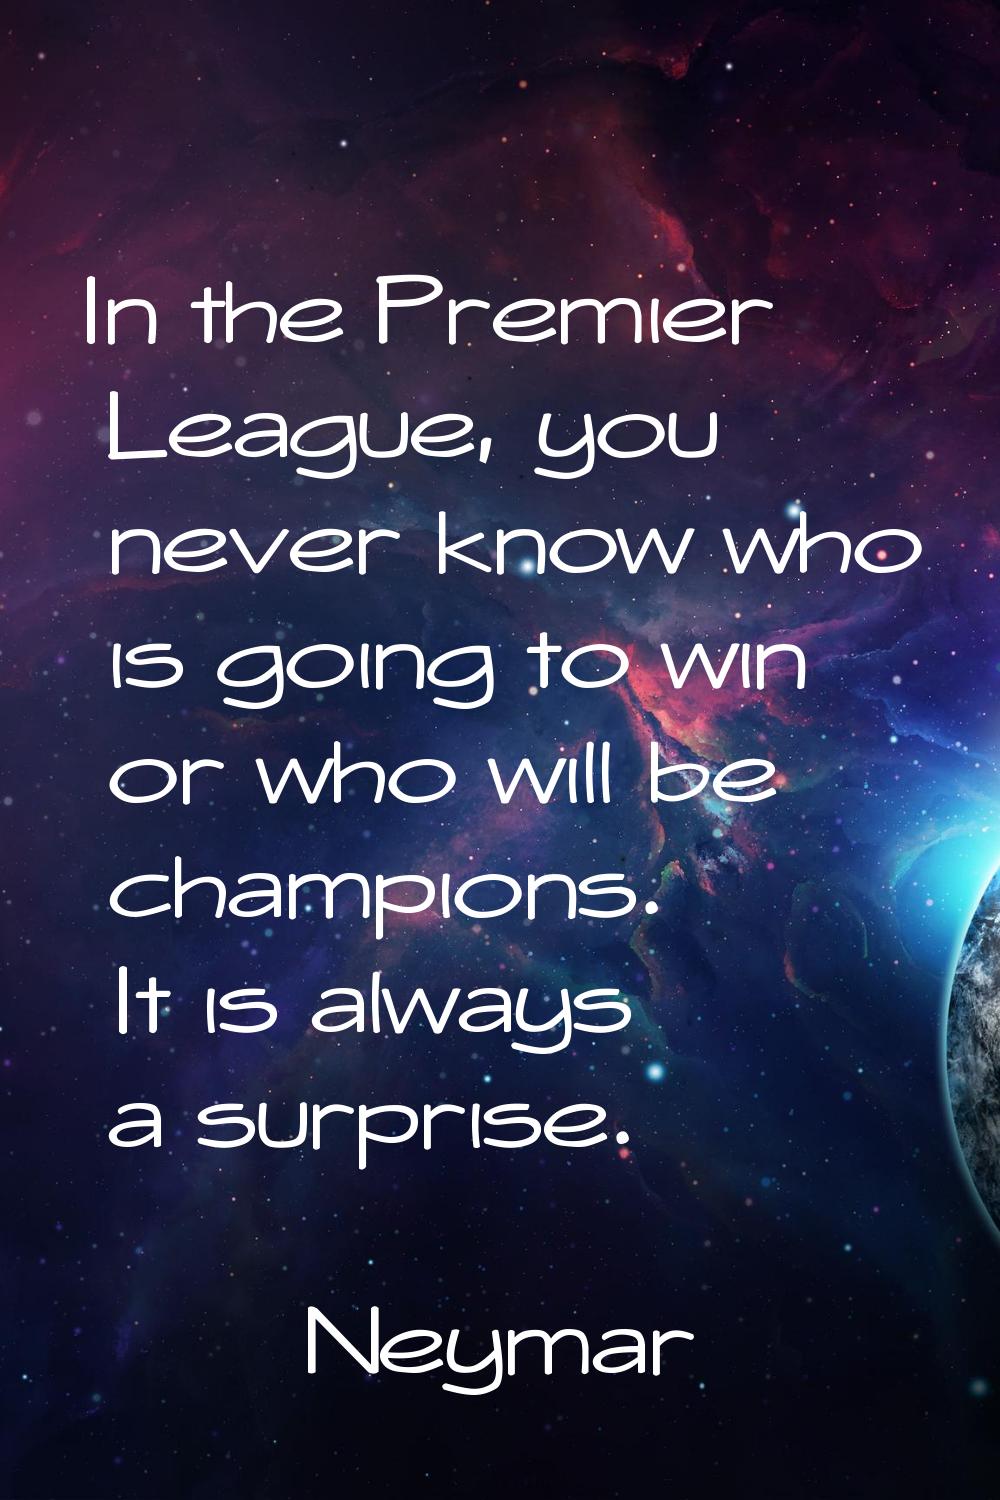 In the Premier League, you never know who is going to win or who will be champions. It is always a 